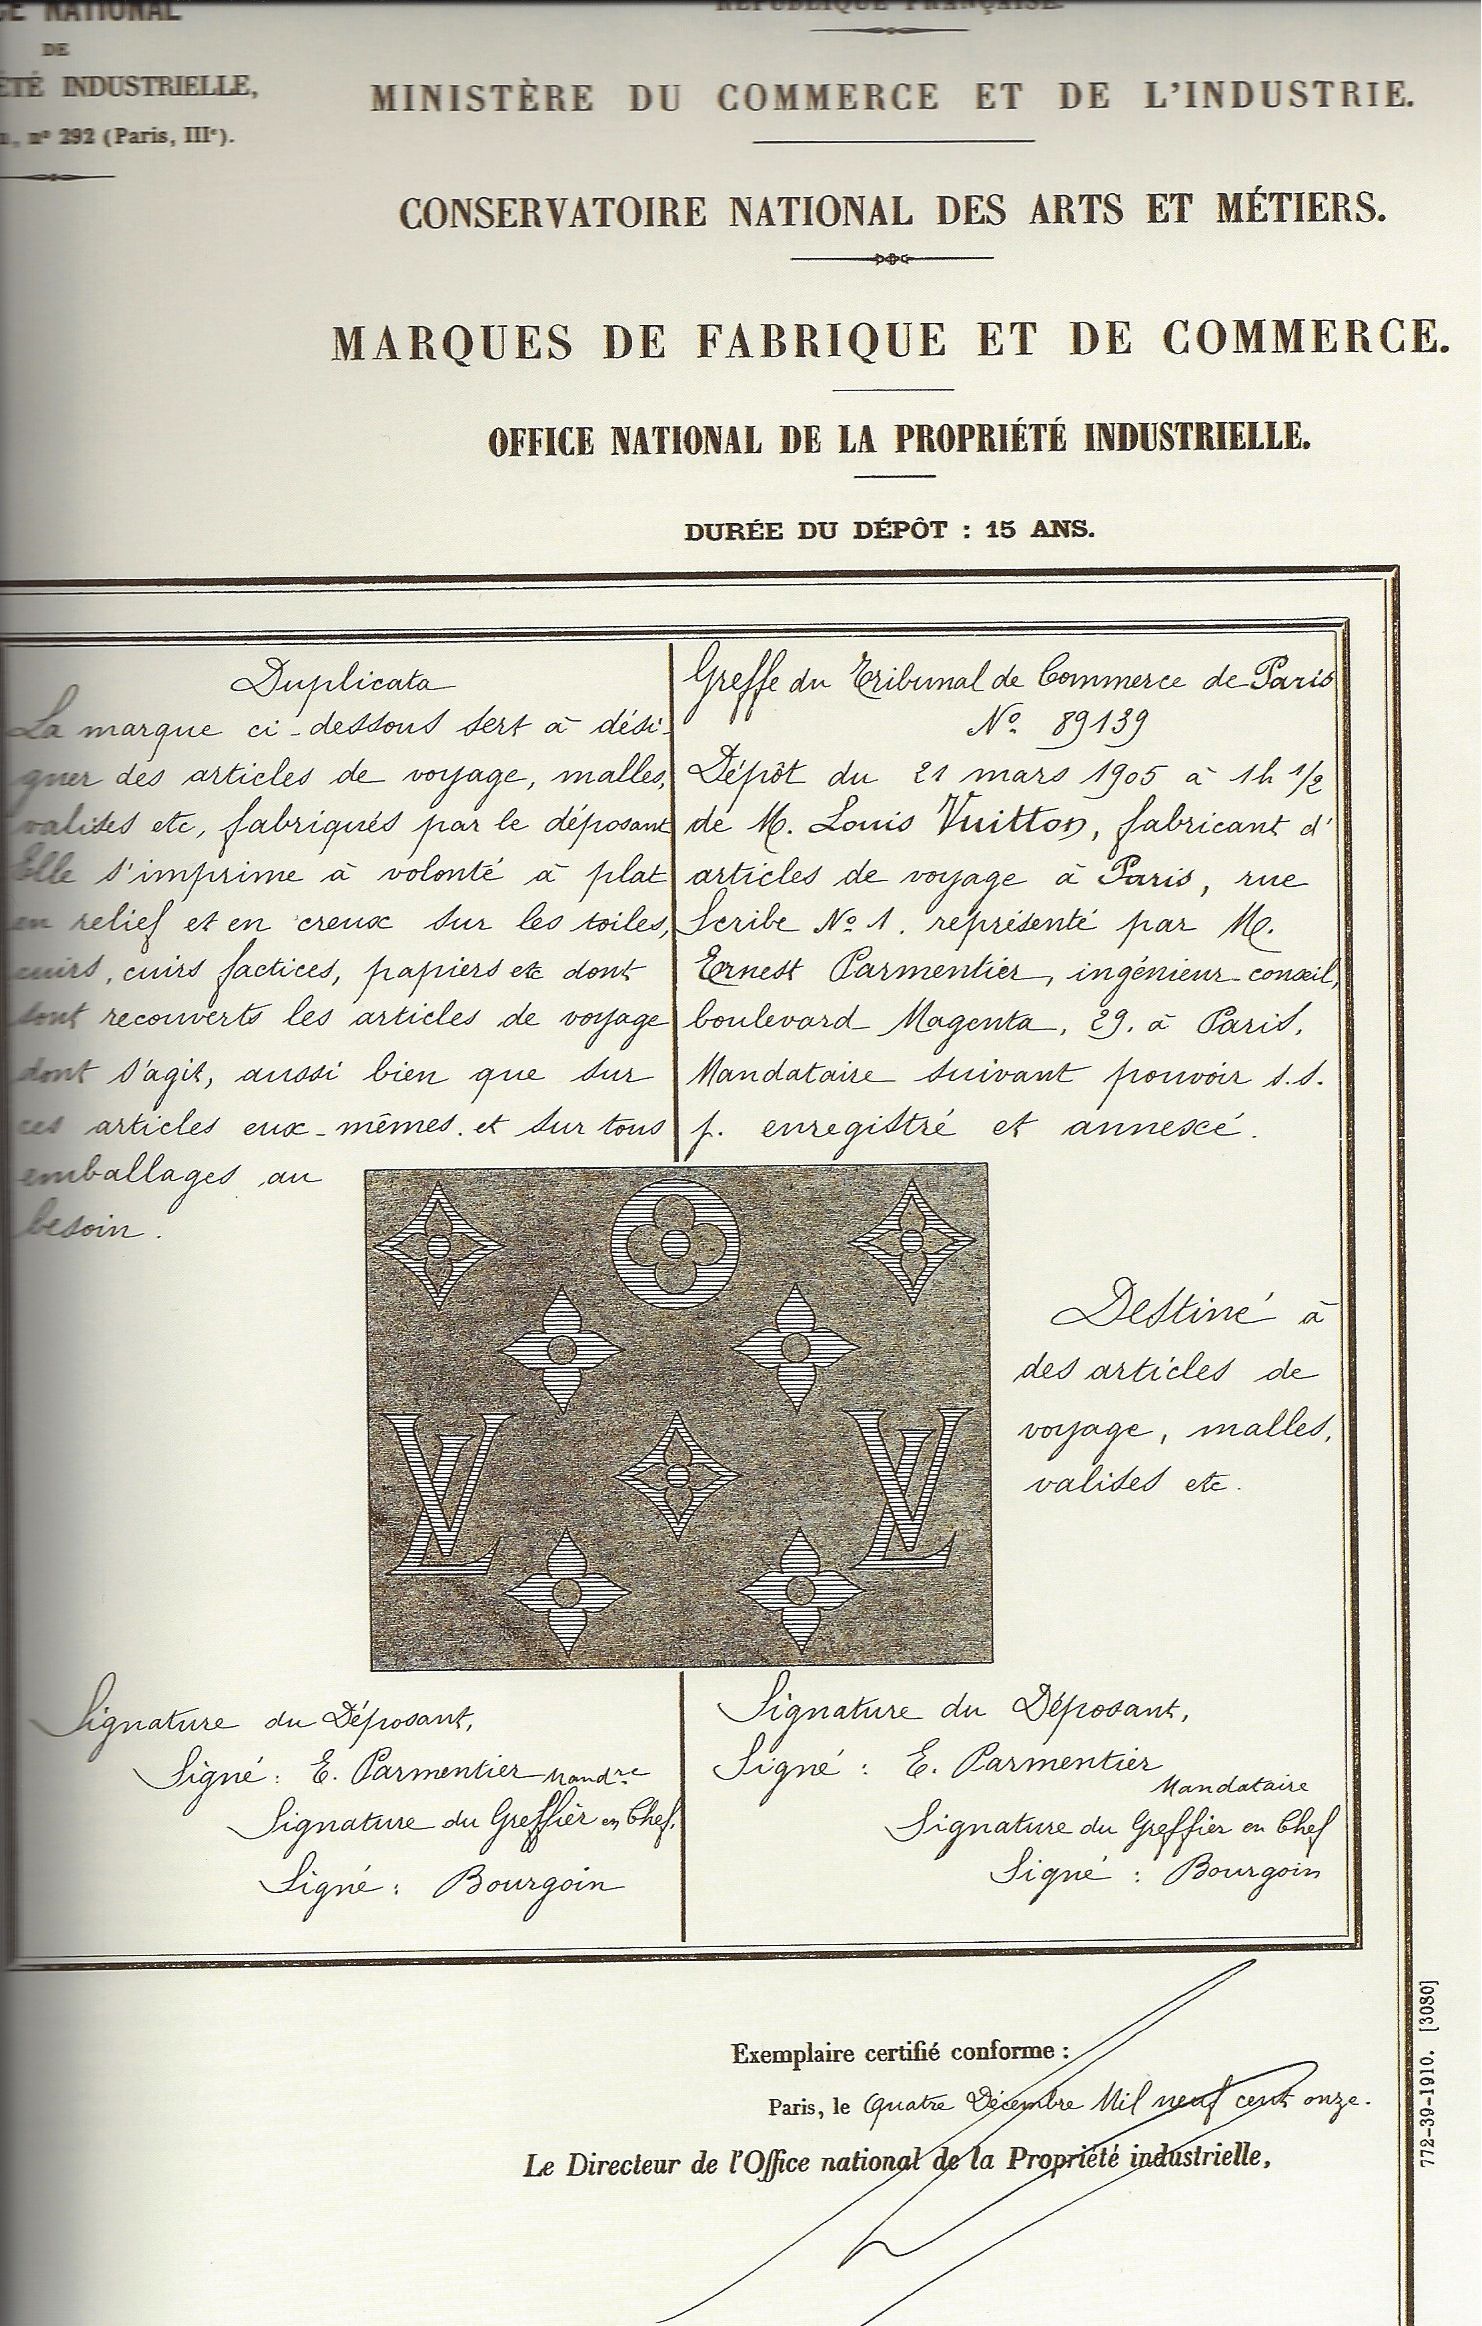 1905 Certificate of the Registration of the Monogram Canvas